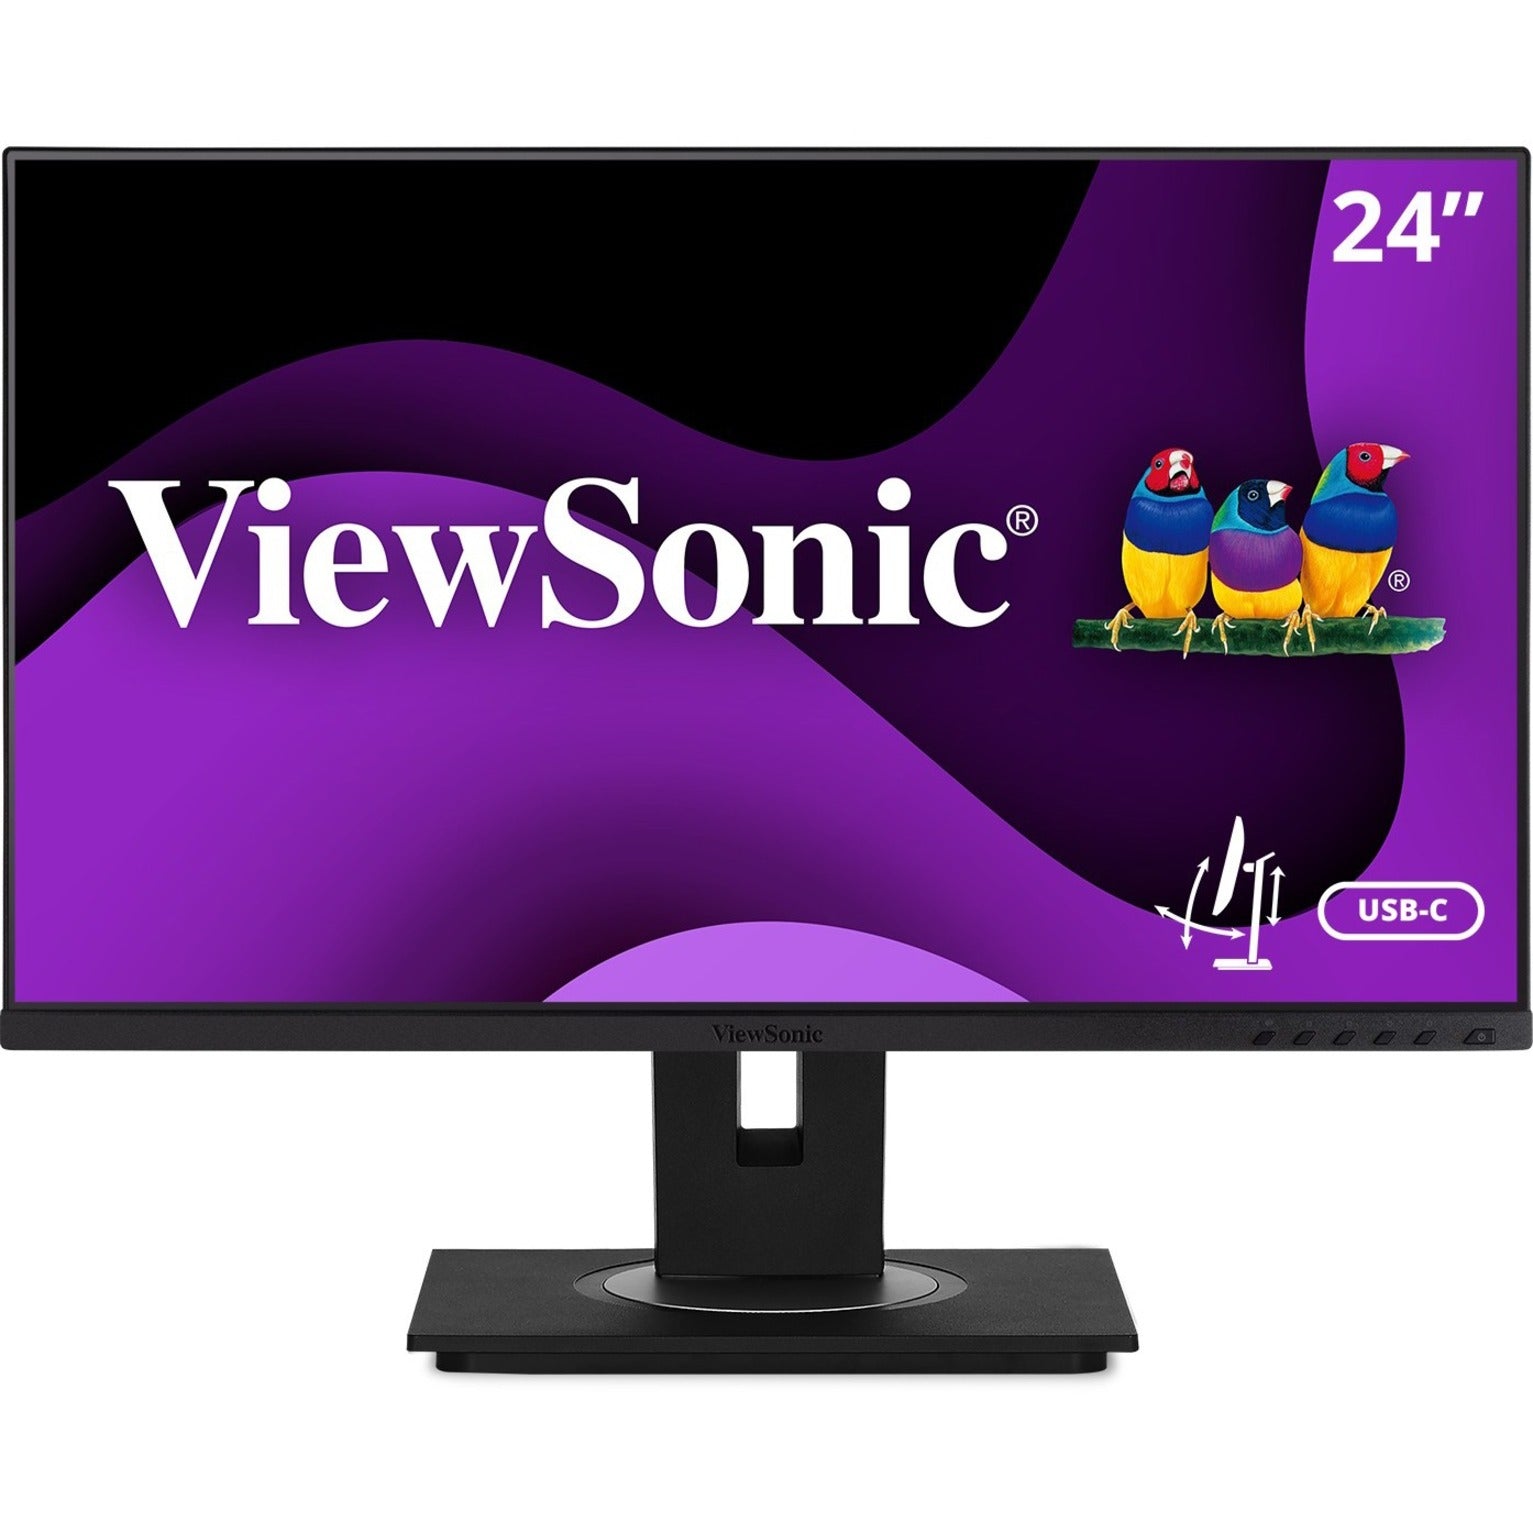 ViewSonic VG2456A 24 Inch 1080p IPS Monitor with USB C 3.2, 90W Power Delivery, Docking Built-In, RJ45, 40 Degree Tilt Ergonomics